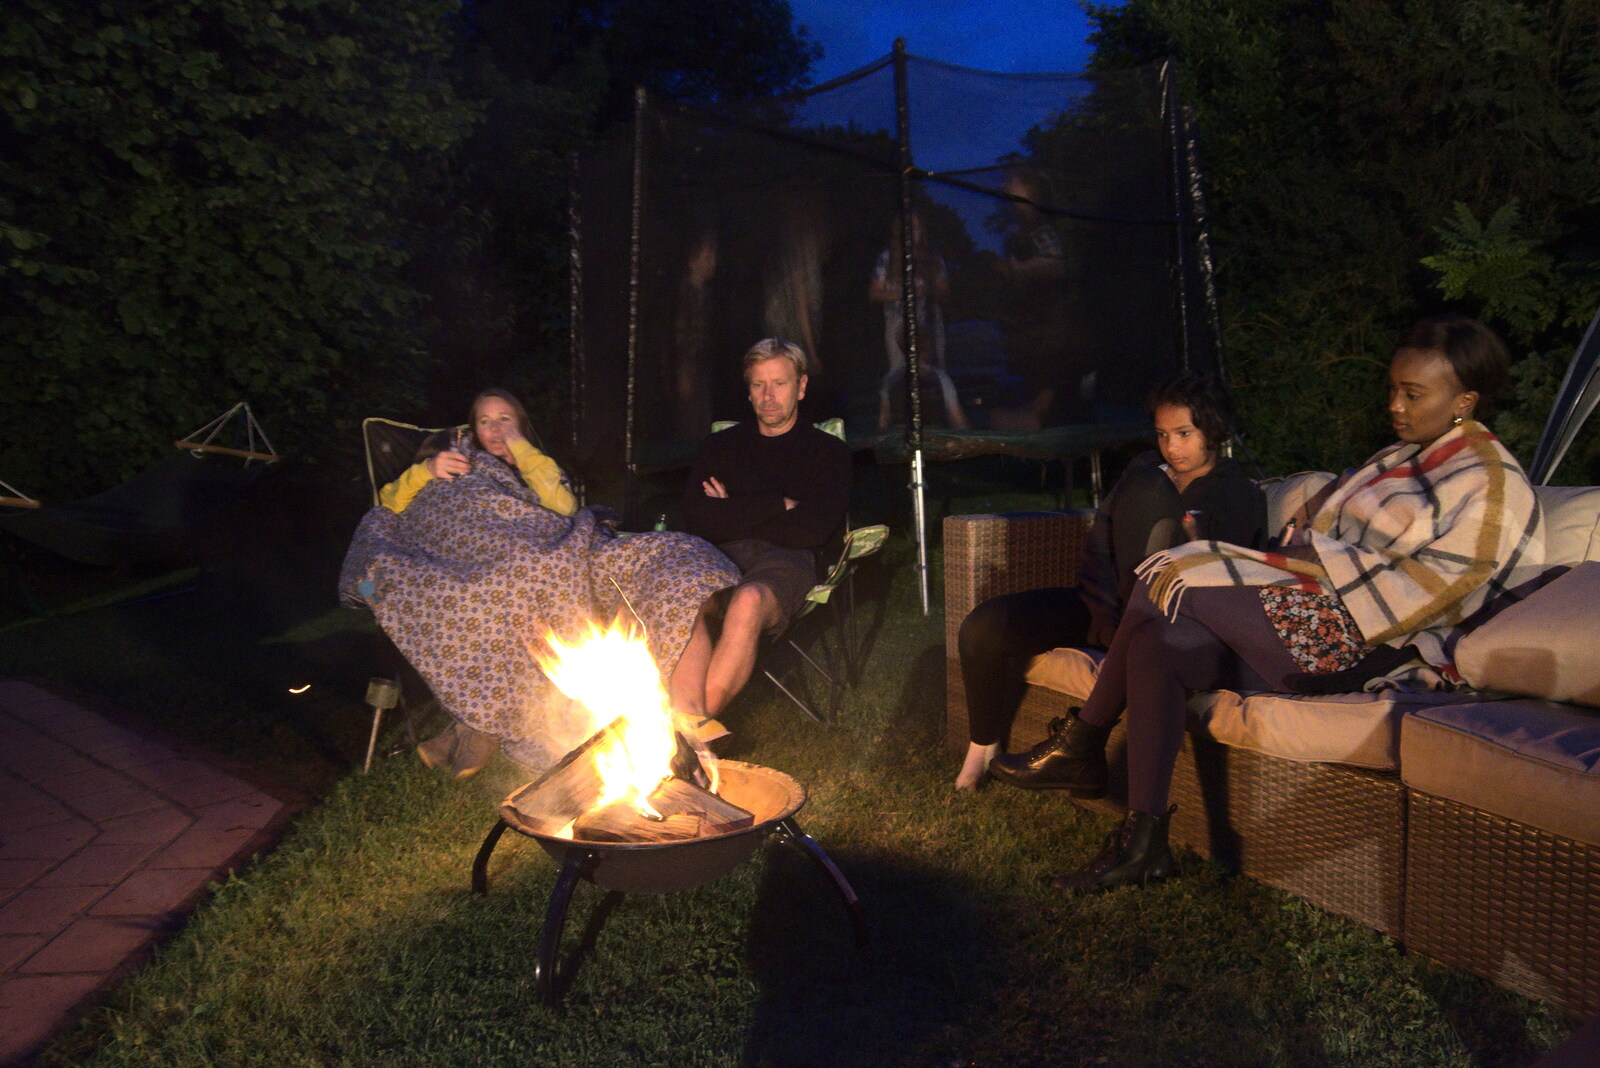 A fire-pit moment from Meg-fest, and Sean Visits, Bressingham and Brome, Suffolk - 1st August 2021